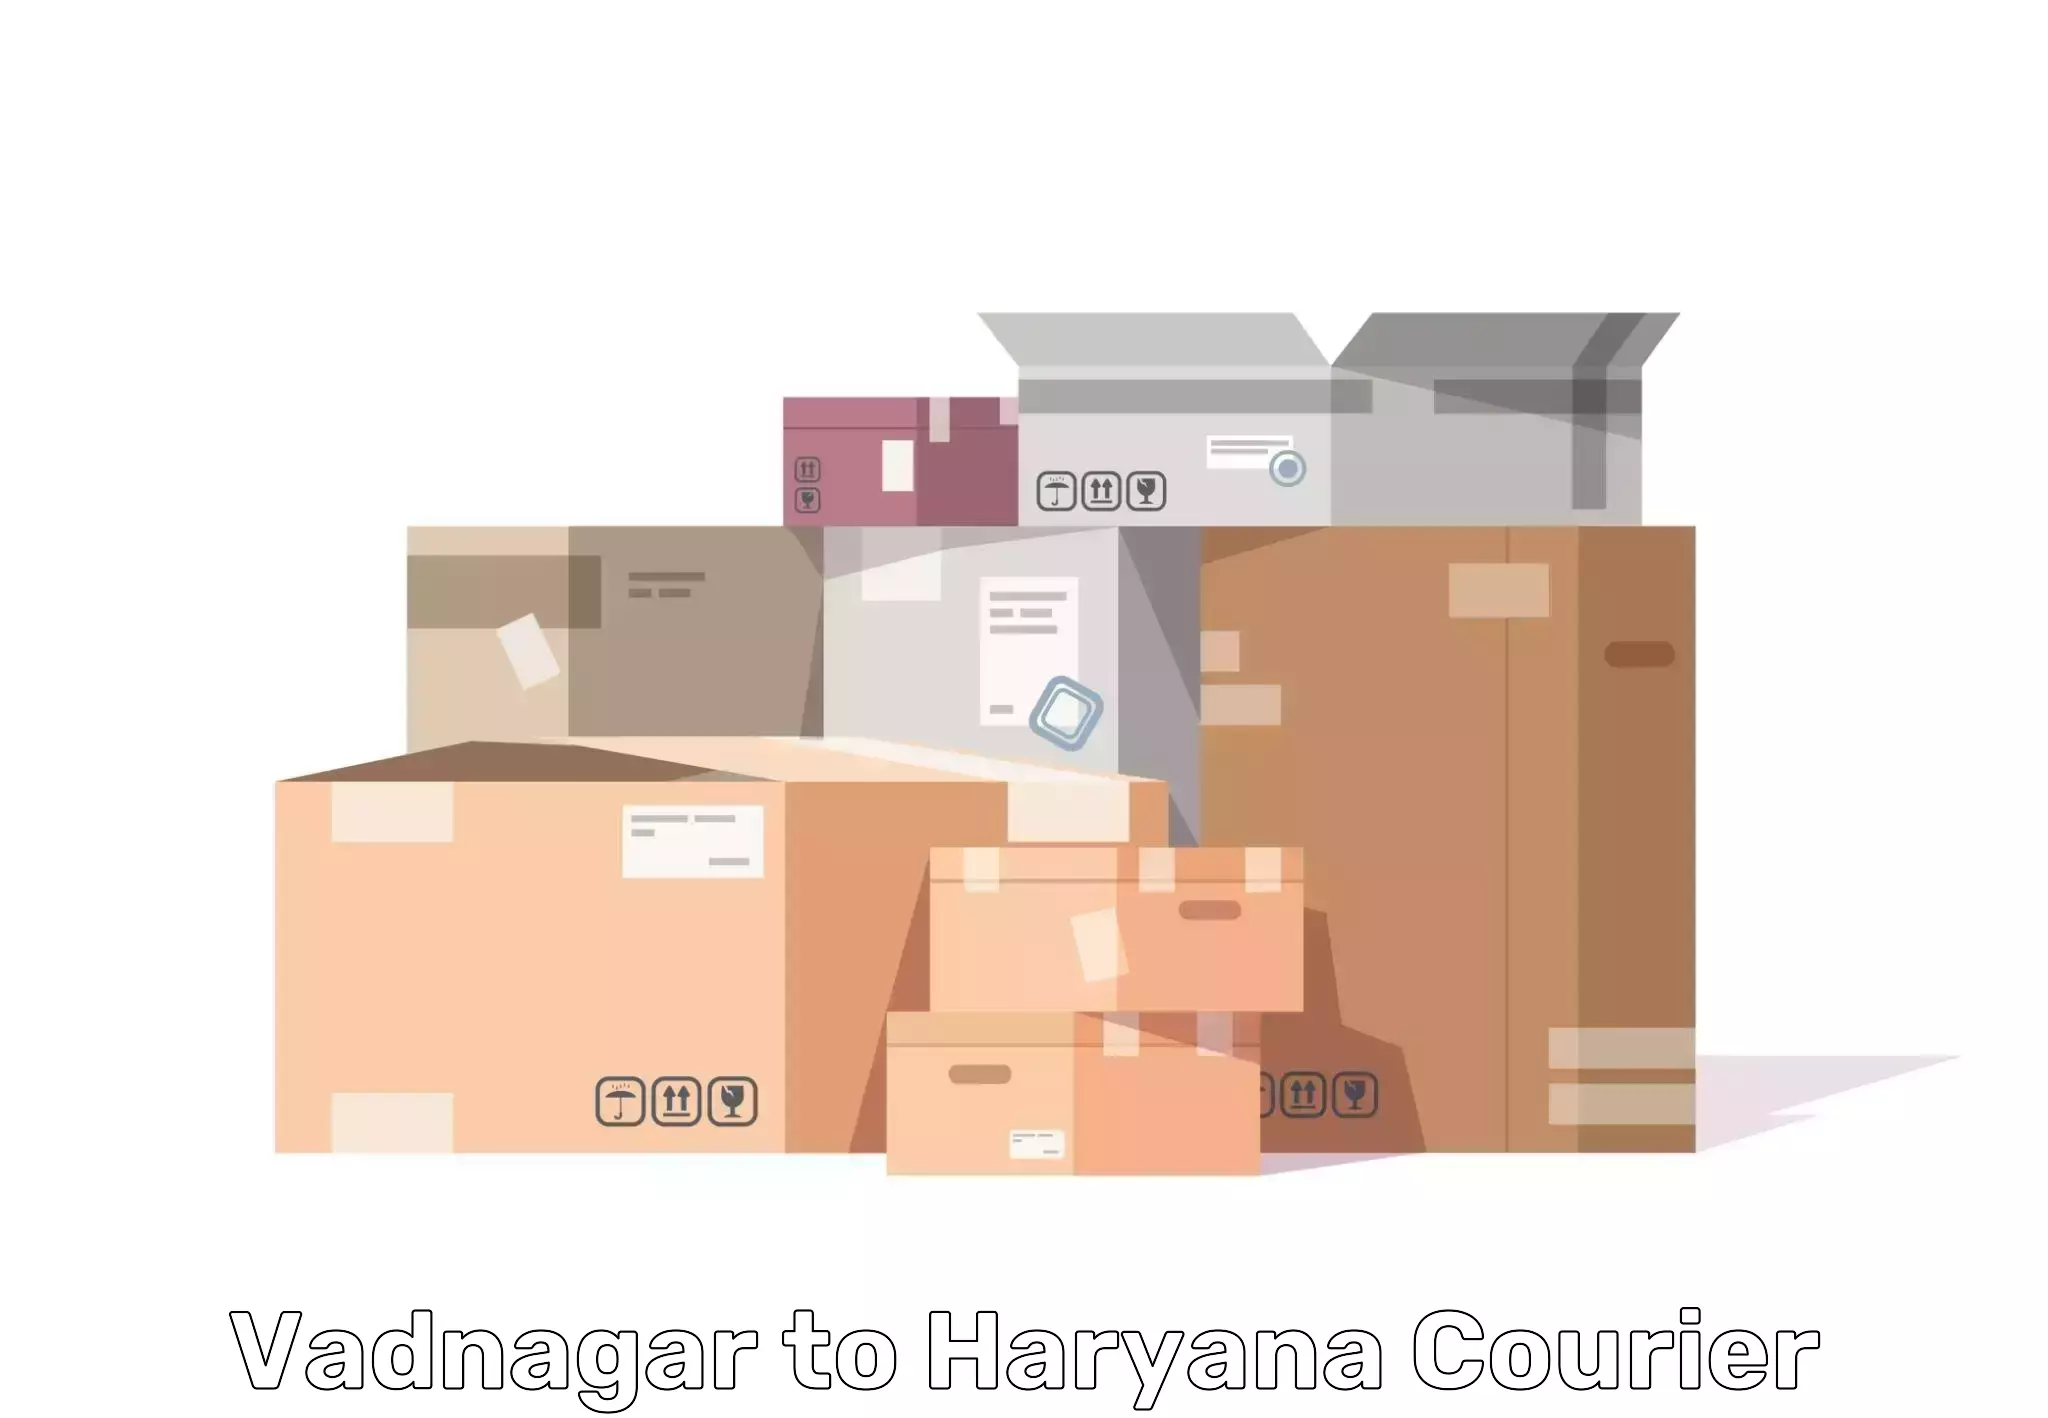 Personalized relocation plans Vadnagar to NCR Haryana